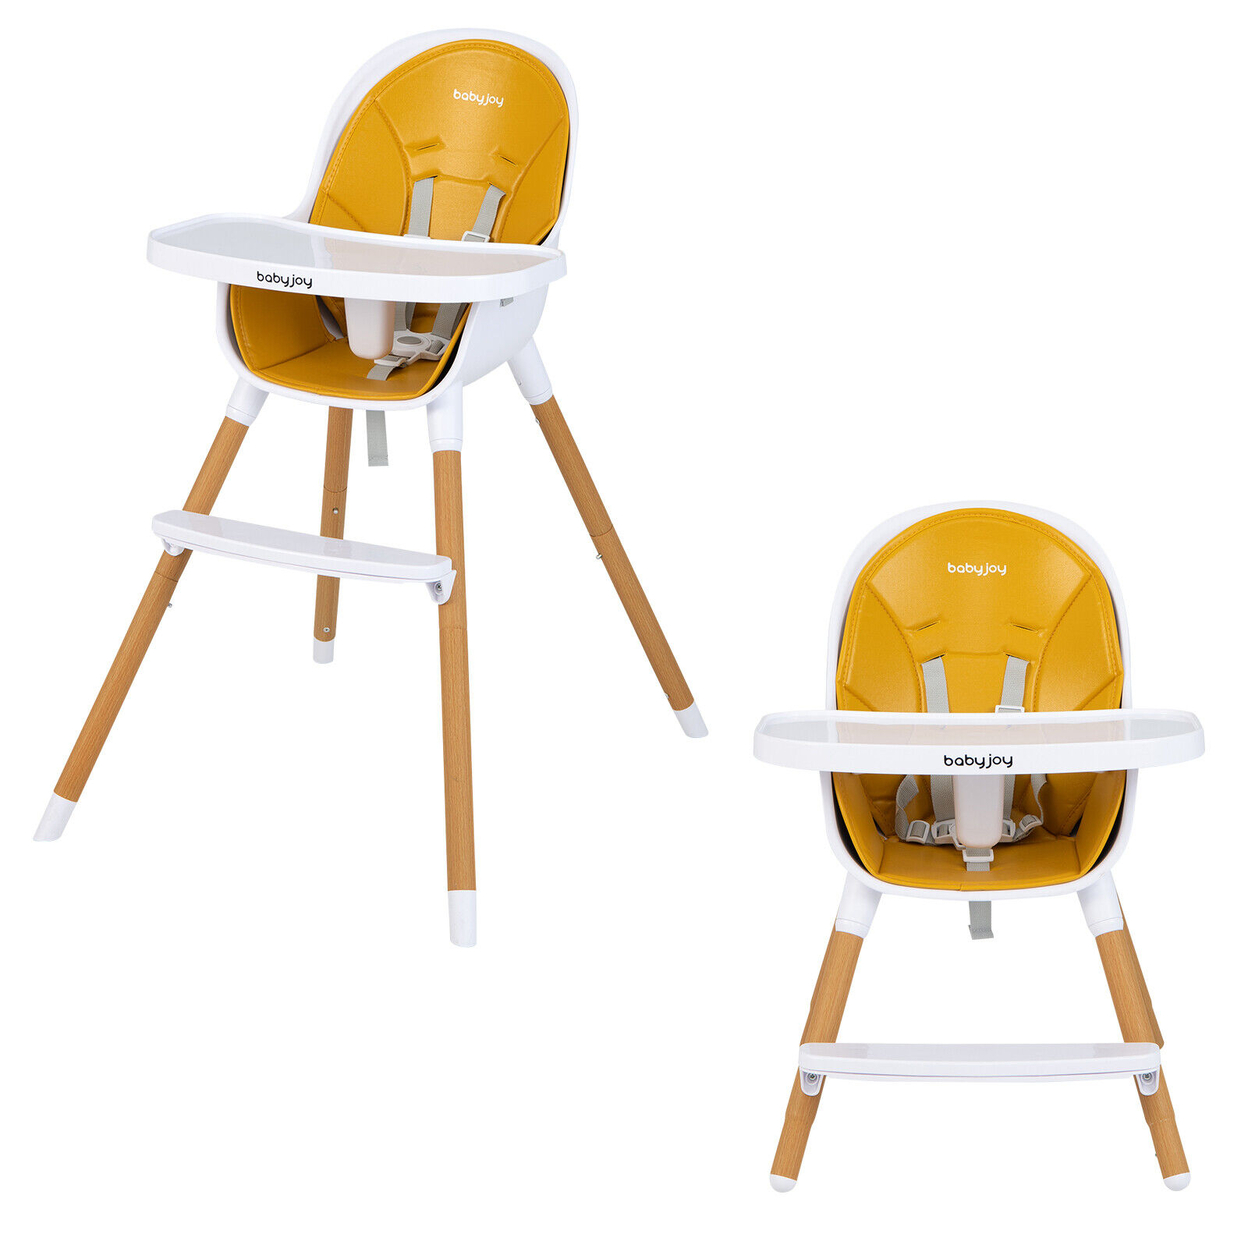 4-in-1 Convertible Baby High Chair Infant Feeding Chair W/Adjustable Tray - Yellow